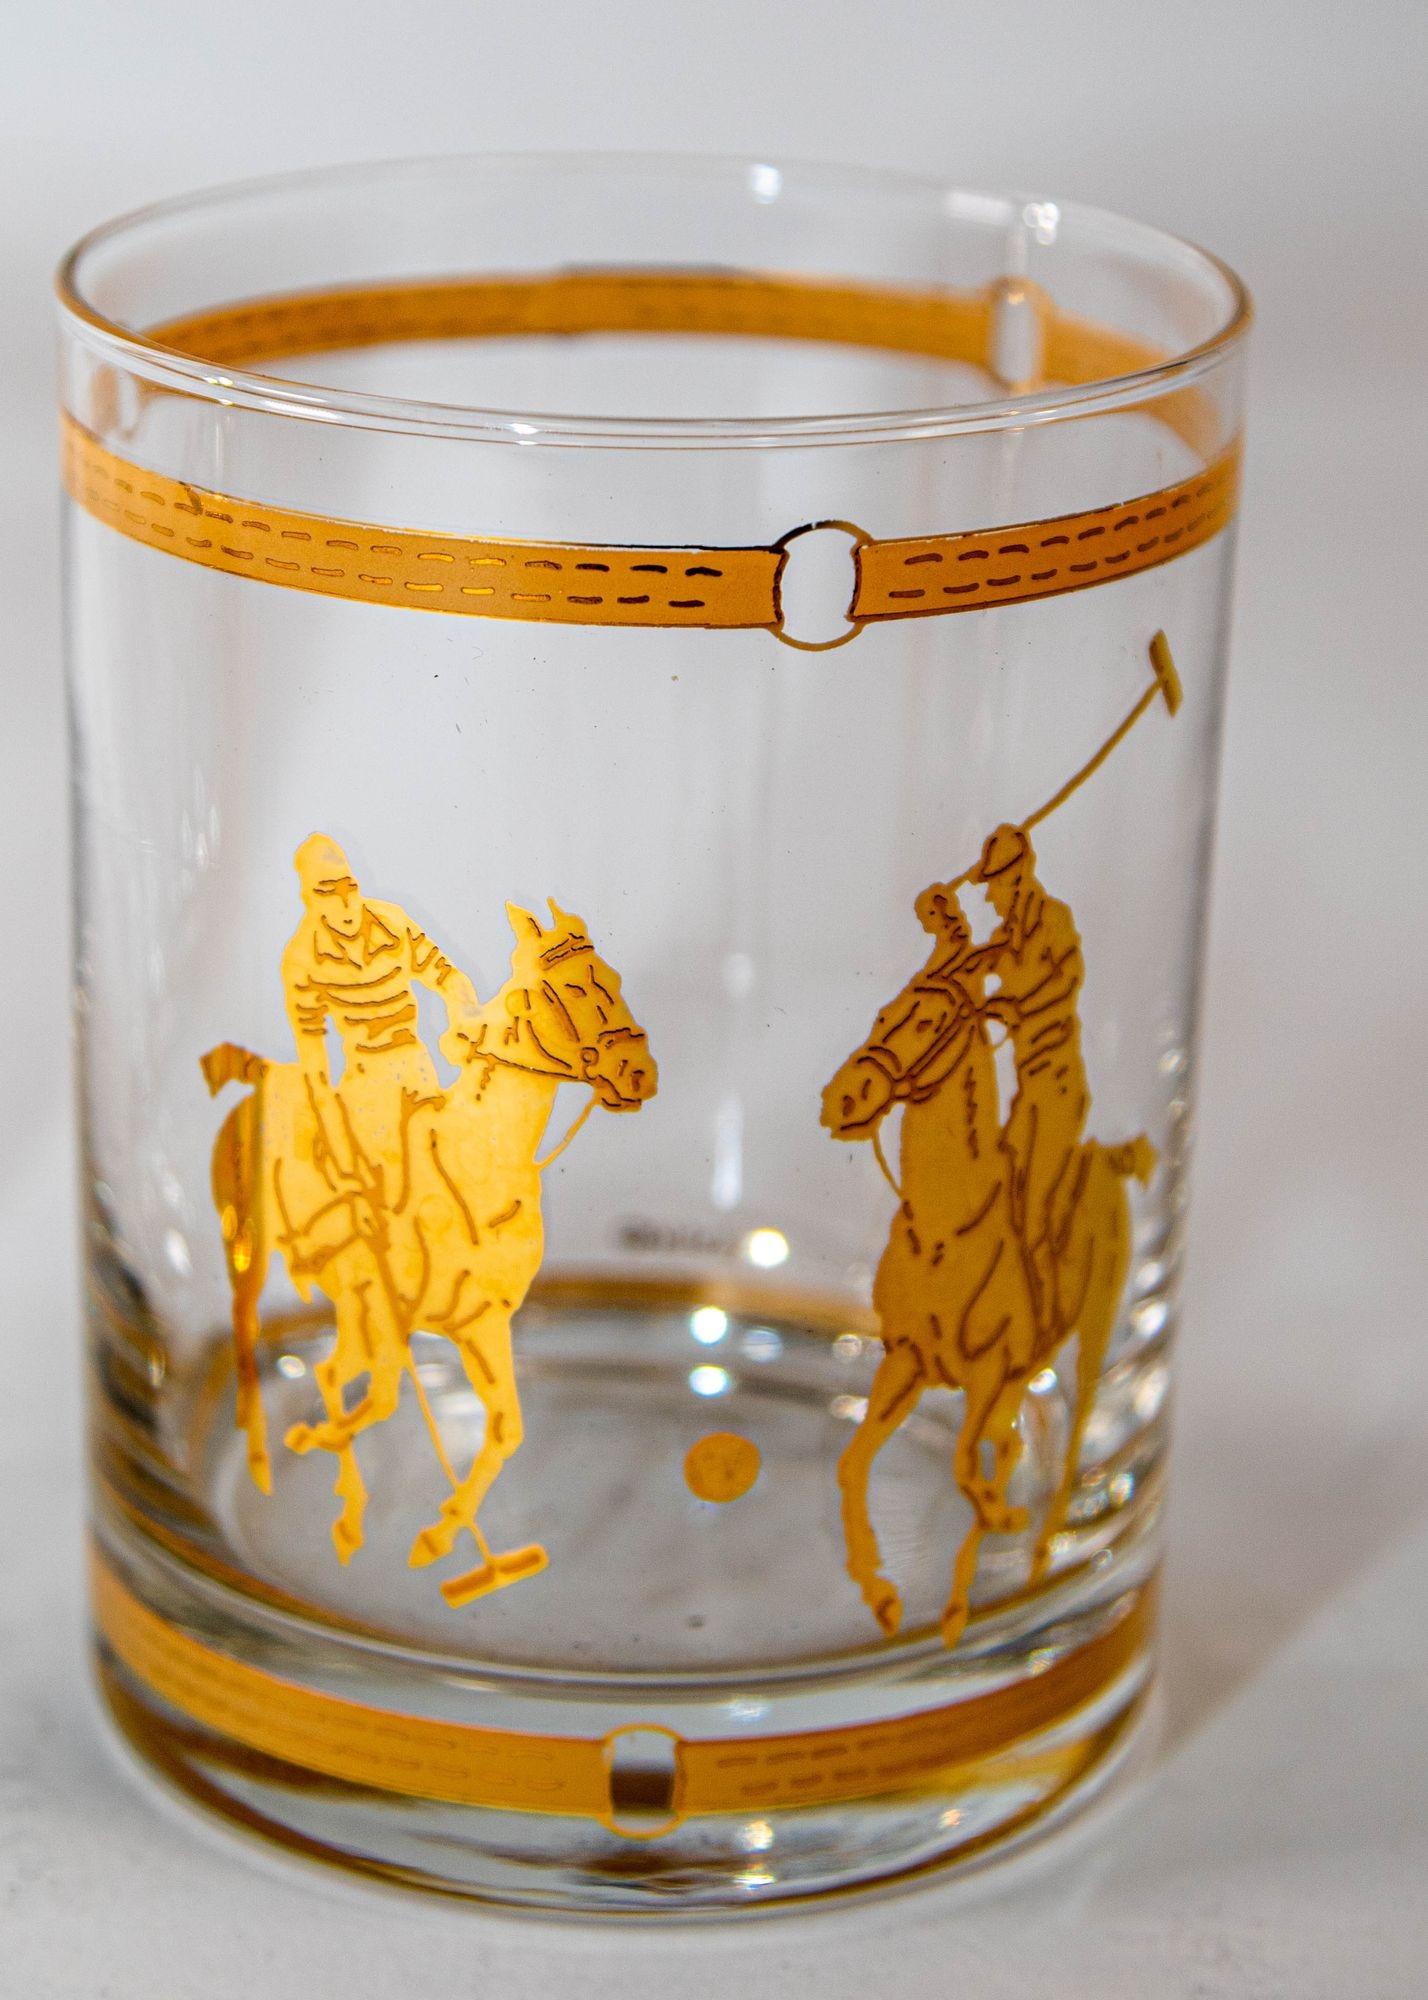 ralph lauren old fashioned glasses